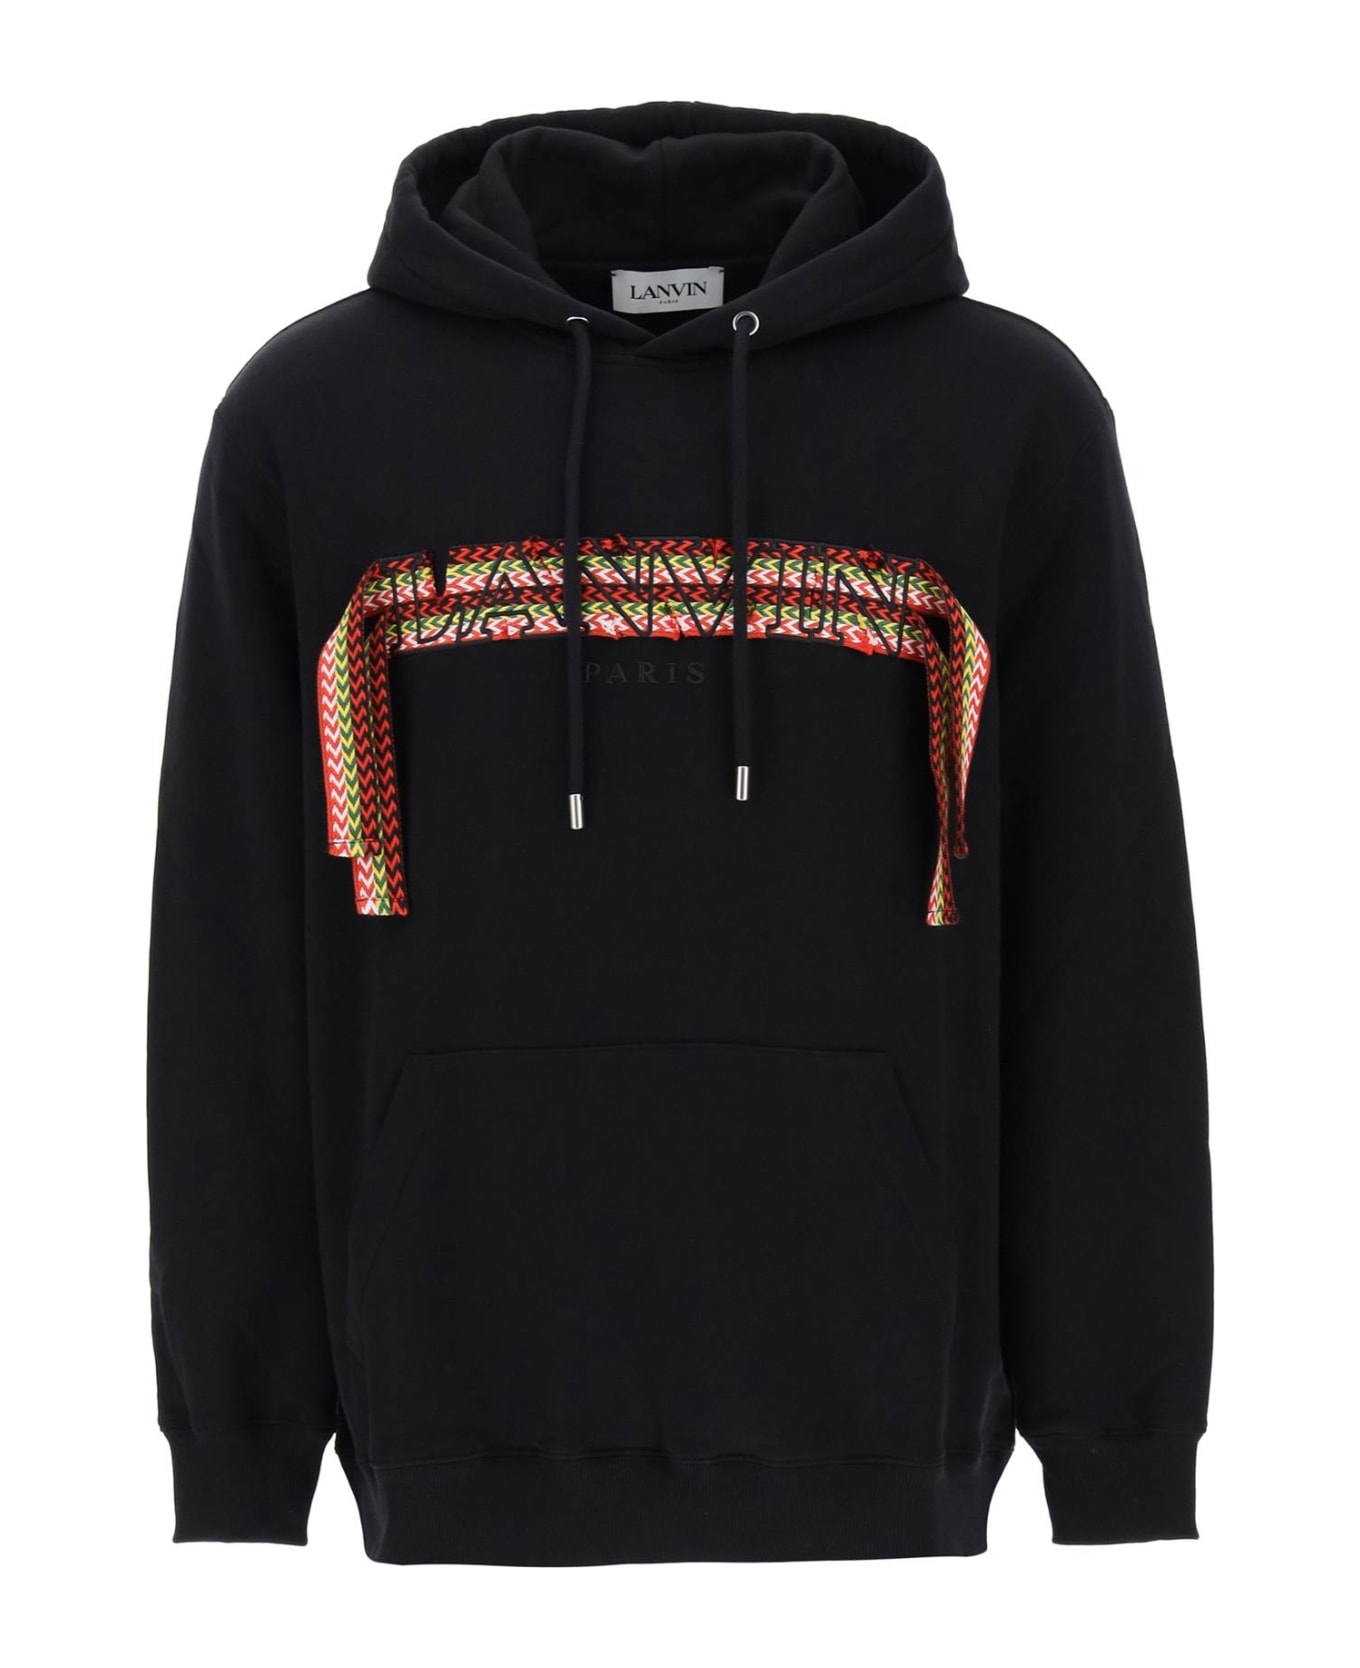 Lanvin 'curb Lace' Oversized Hoodie - Black フリース